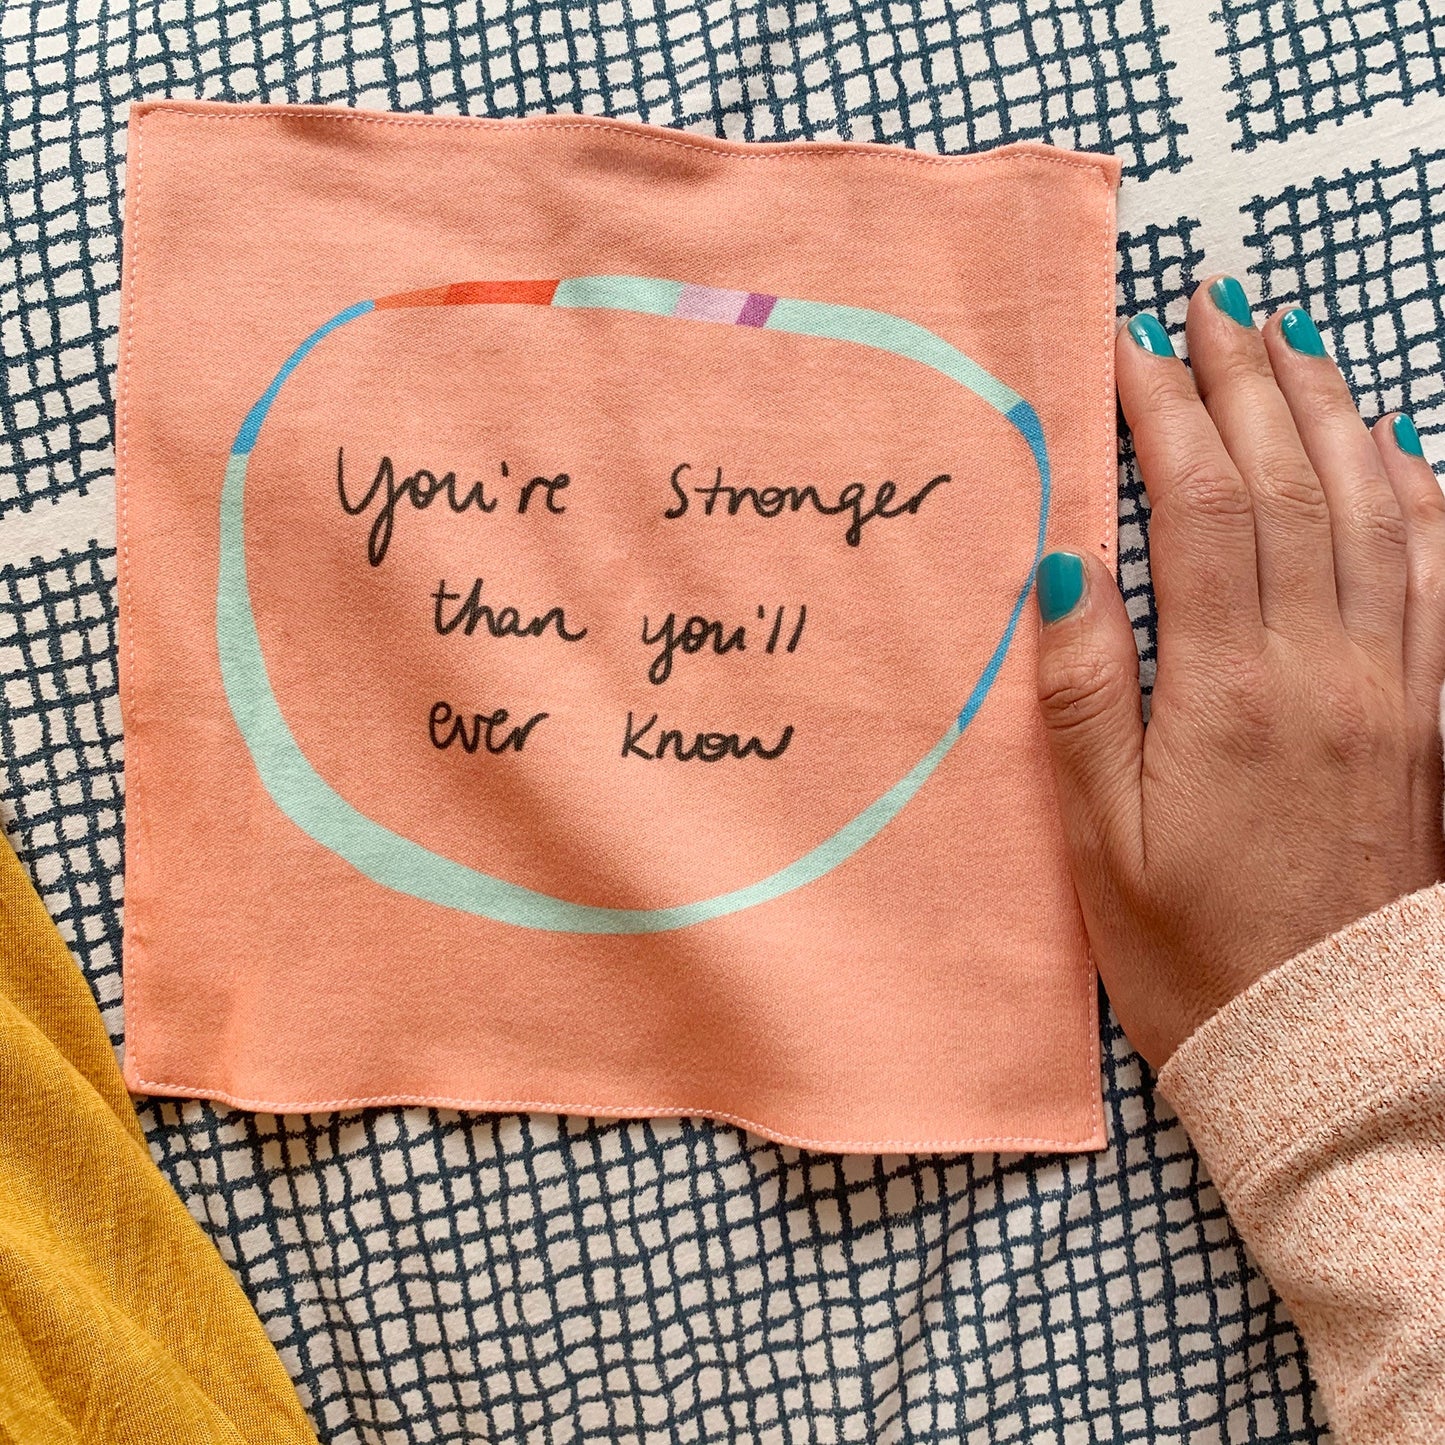 You're stronger than you'll ever know organic cotton handkerchief